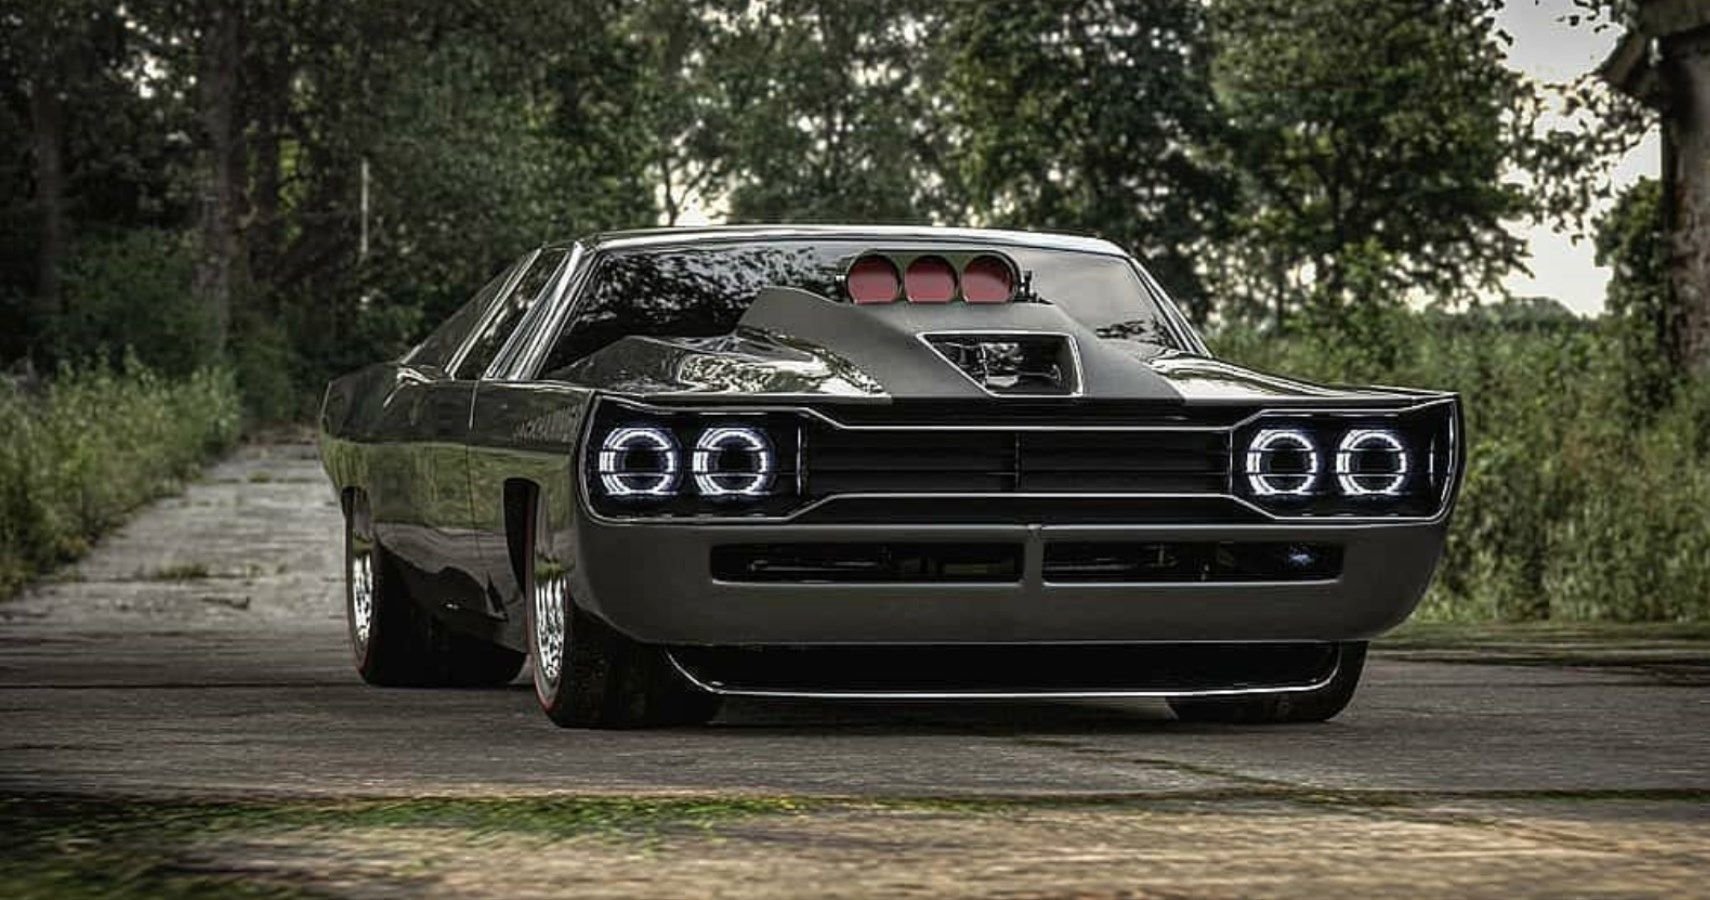 'Jackhammer' Muscle Car Blends Plymouth GTX And Dodge Charger Into Something Striking